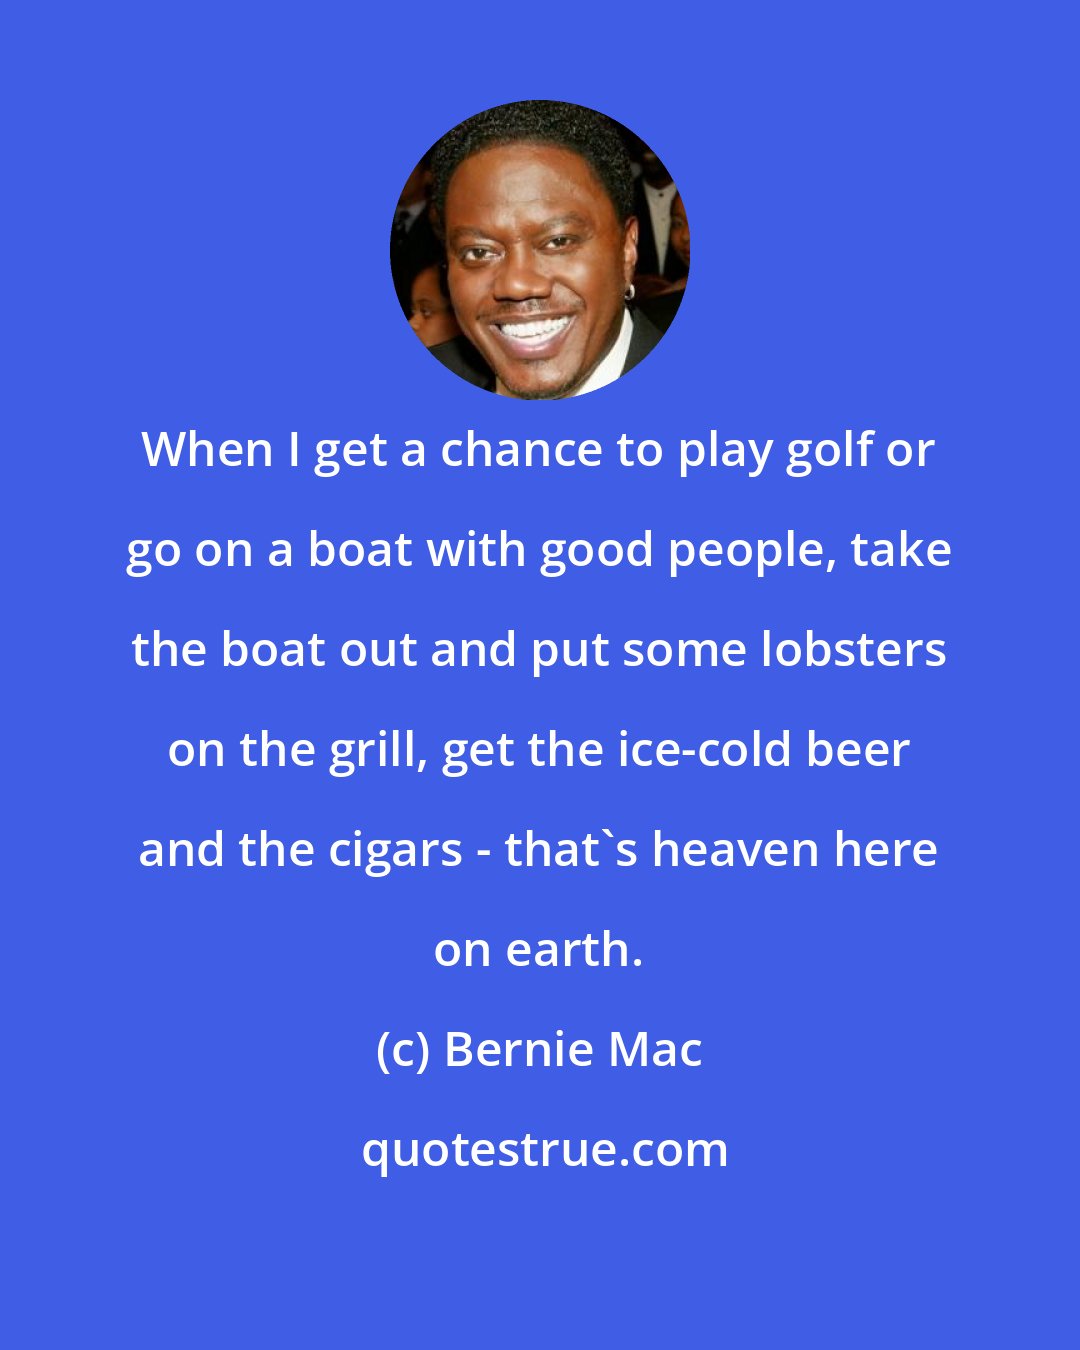 Bernie Mac: When I get a chance to play golf or go on a boat with good people, take the boat out and put some lobsters on the grill, get the ice-cold beer and the cigars - that's heaven here on earth.